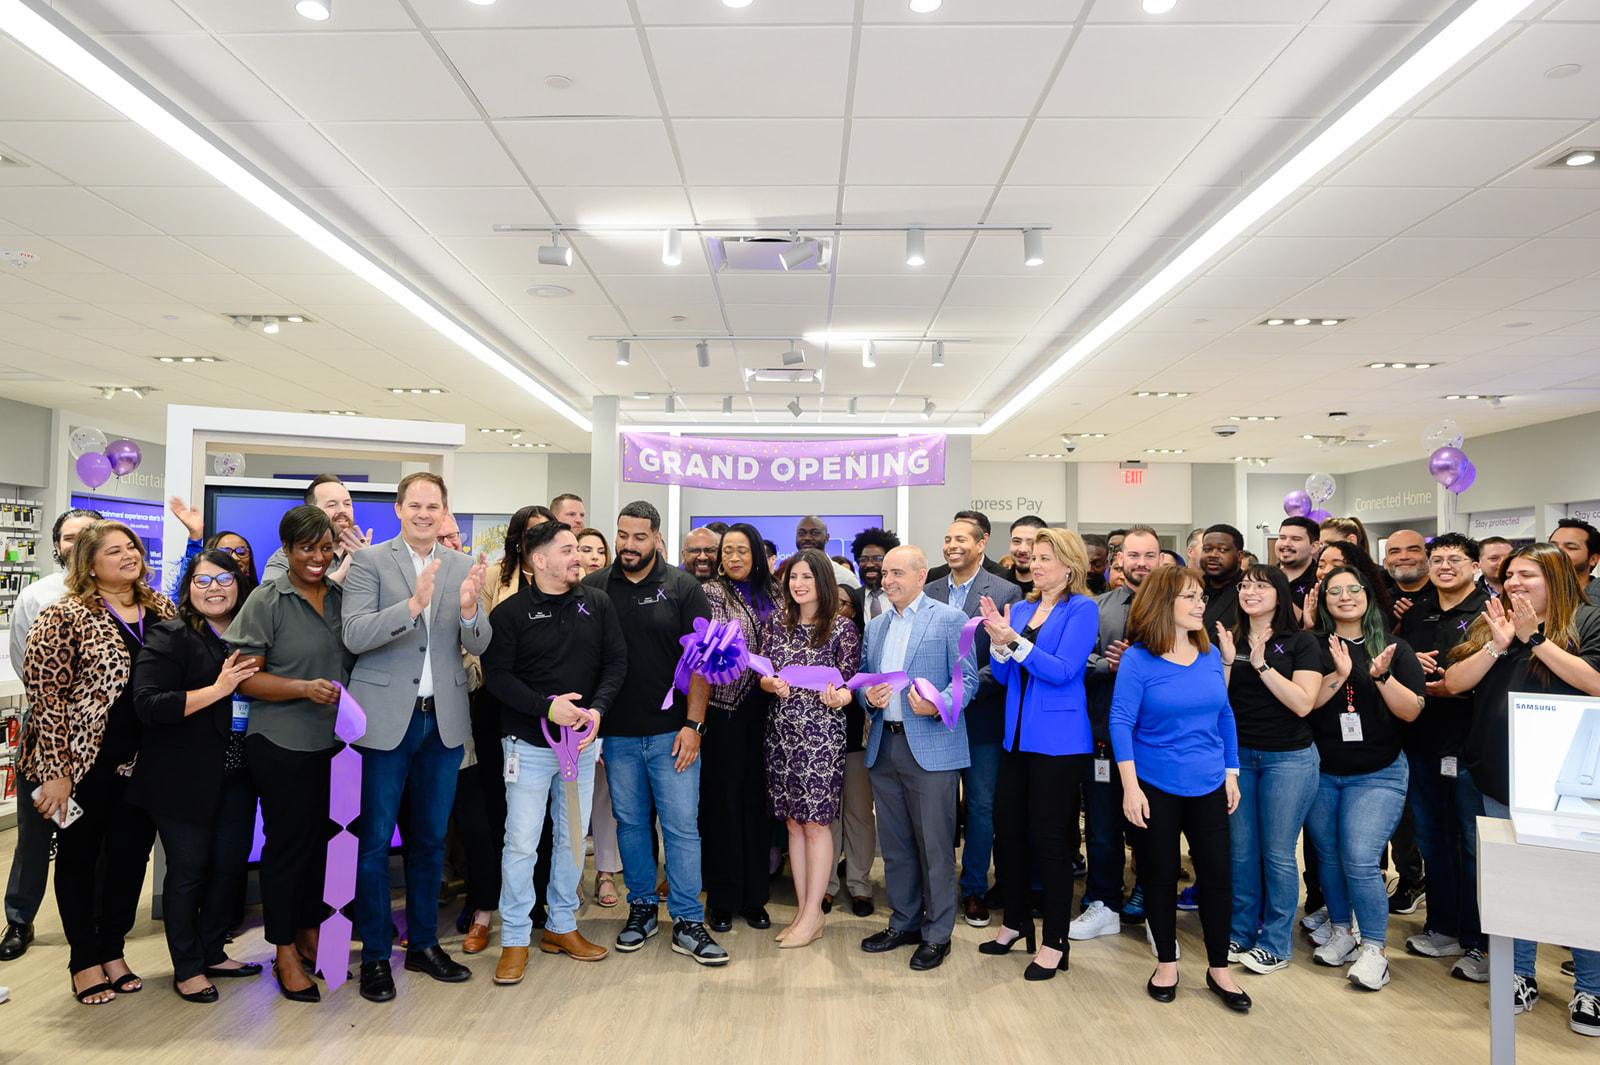 Comcast joins with community partners to celebrate store openings